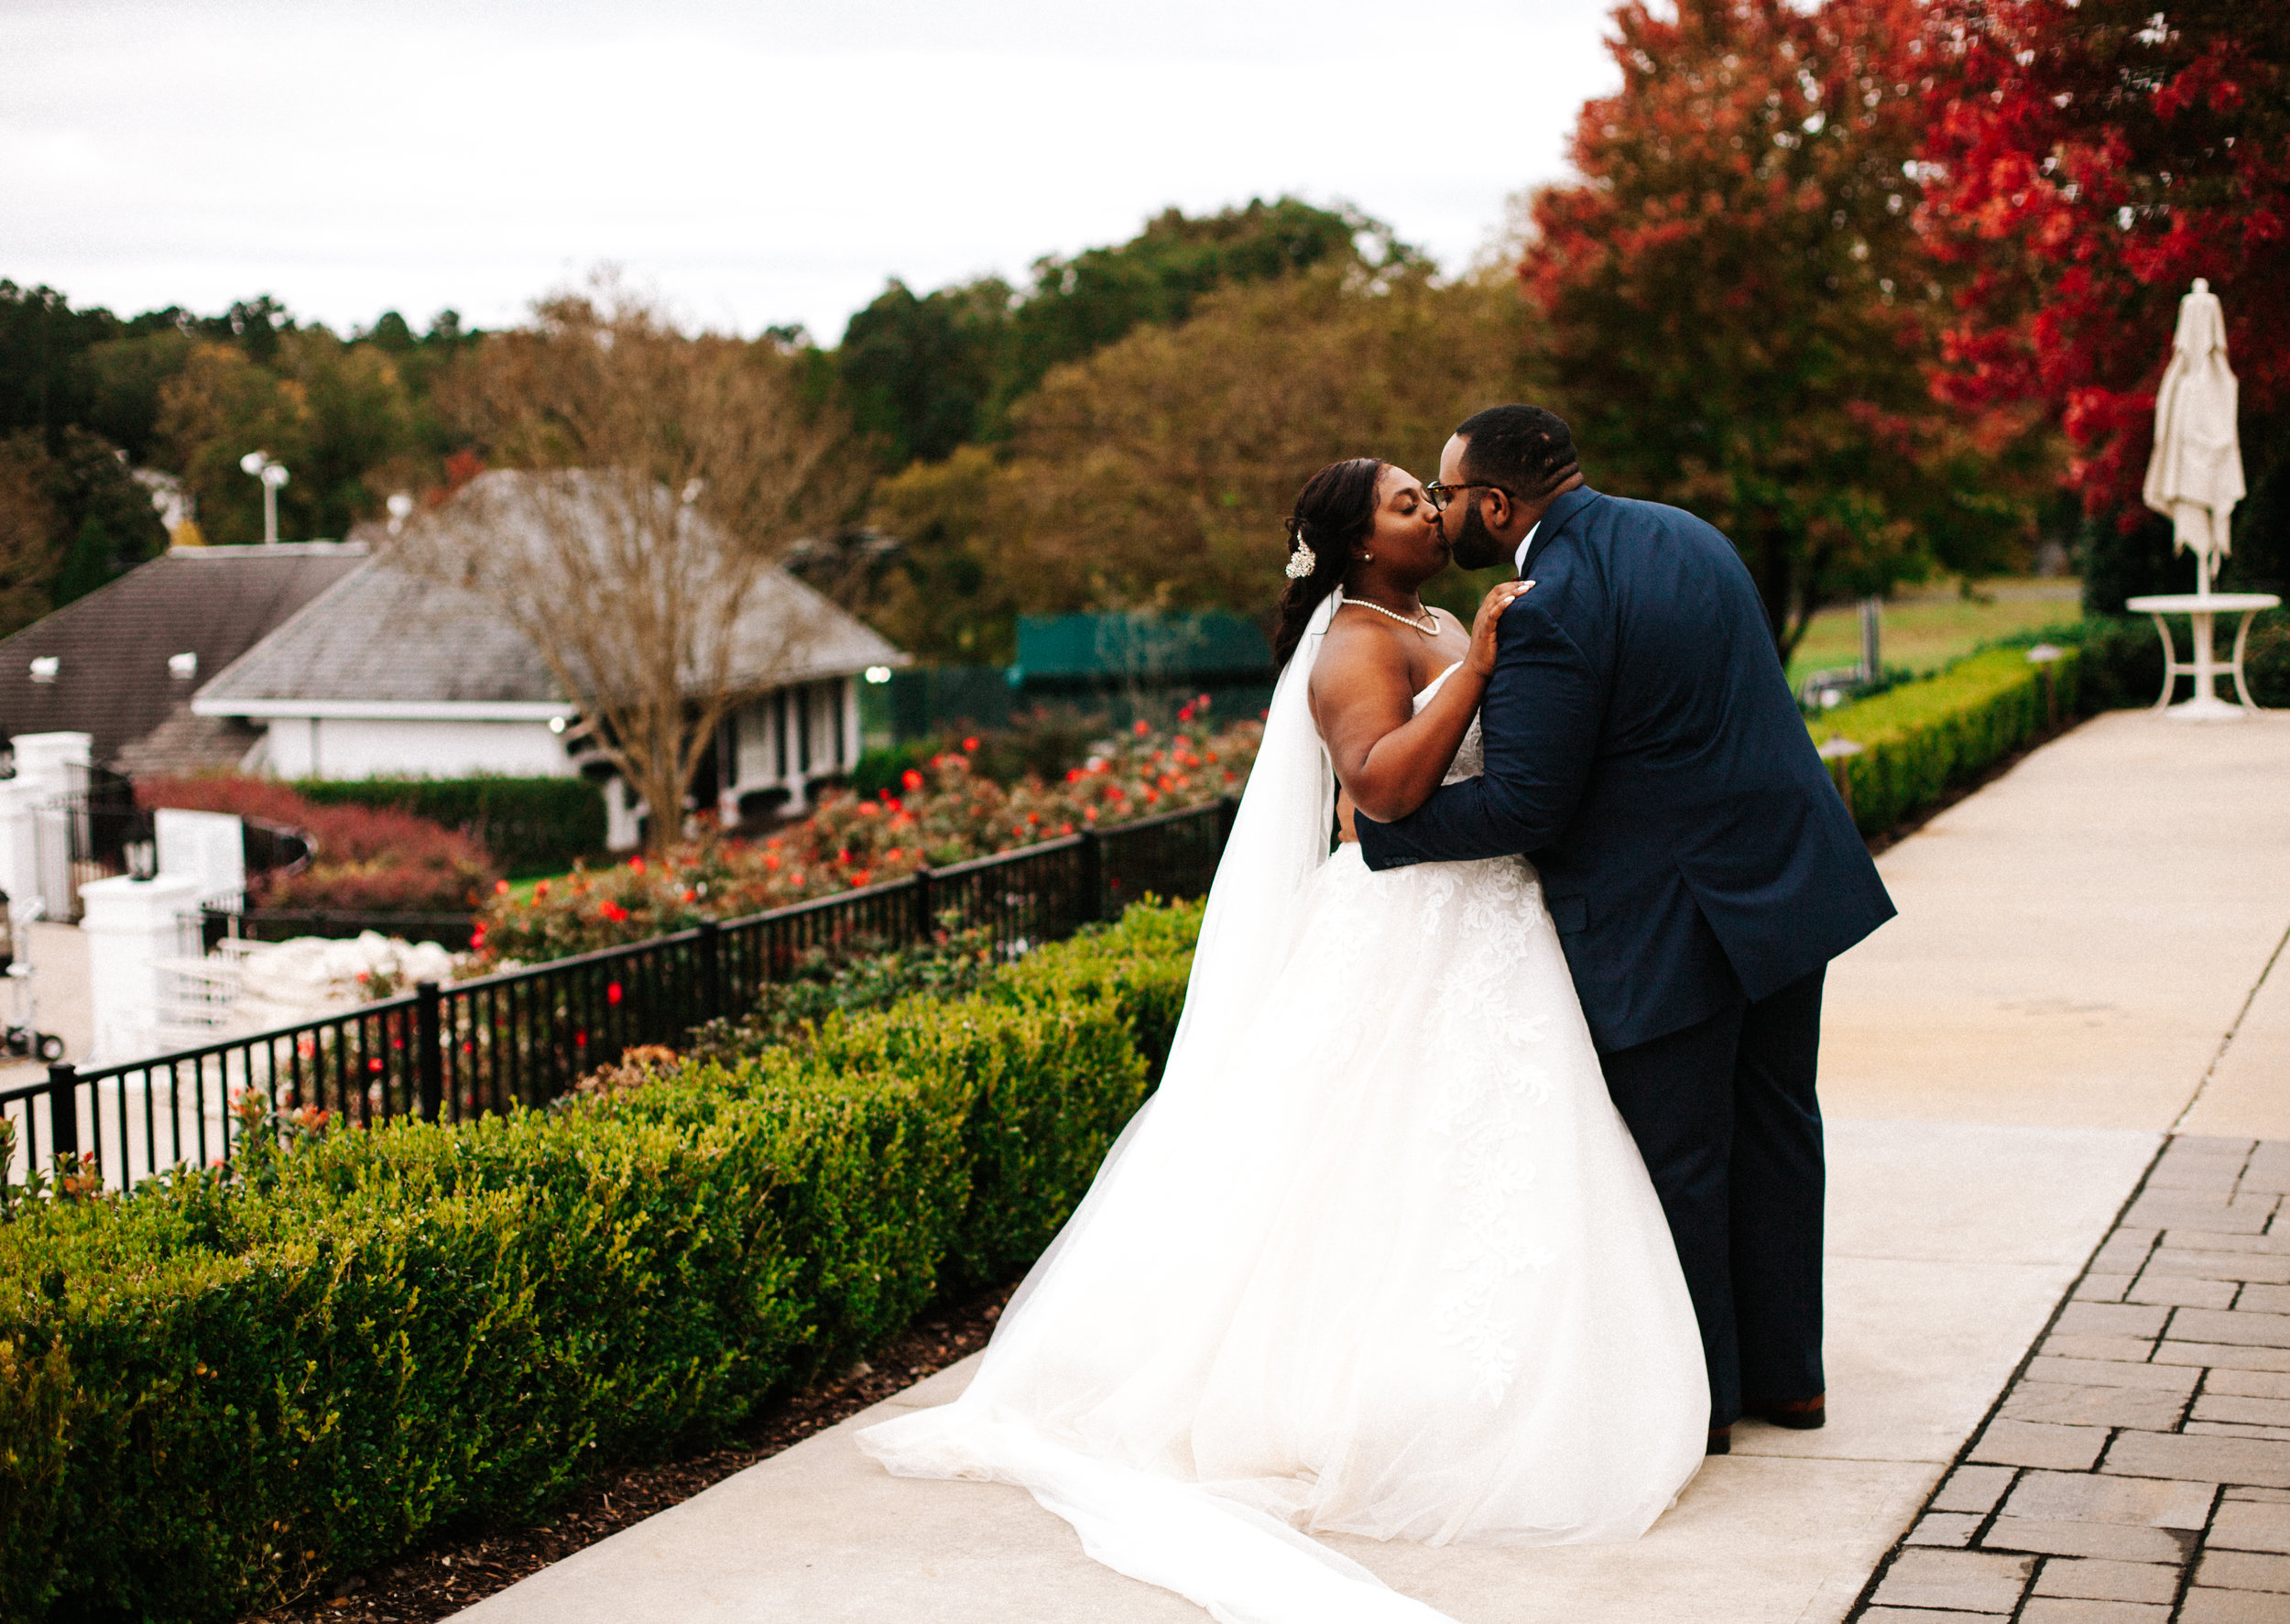  Hope Valley Country Club, Raleigh NC | Fall wedding | First look photos | Marina Rey Photography 